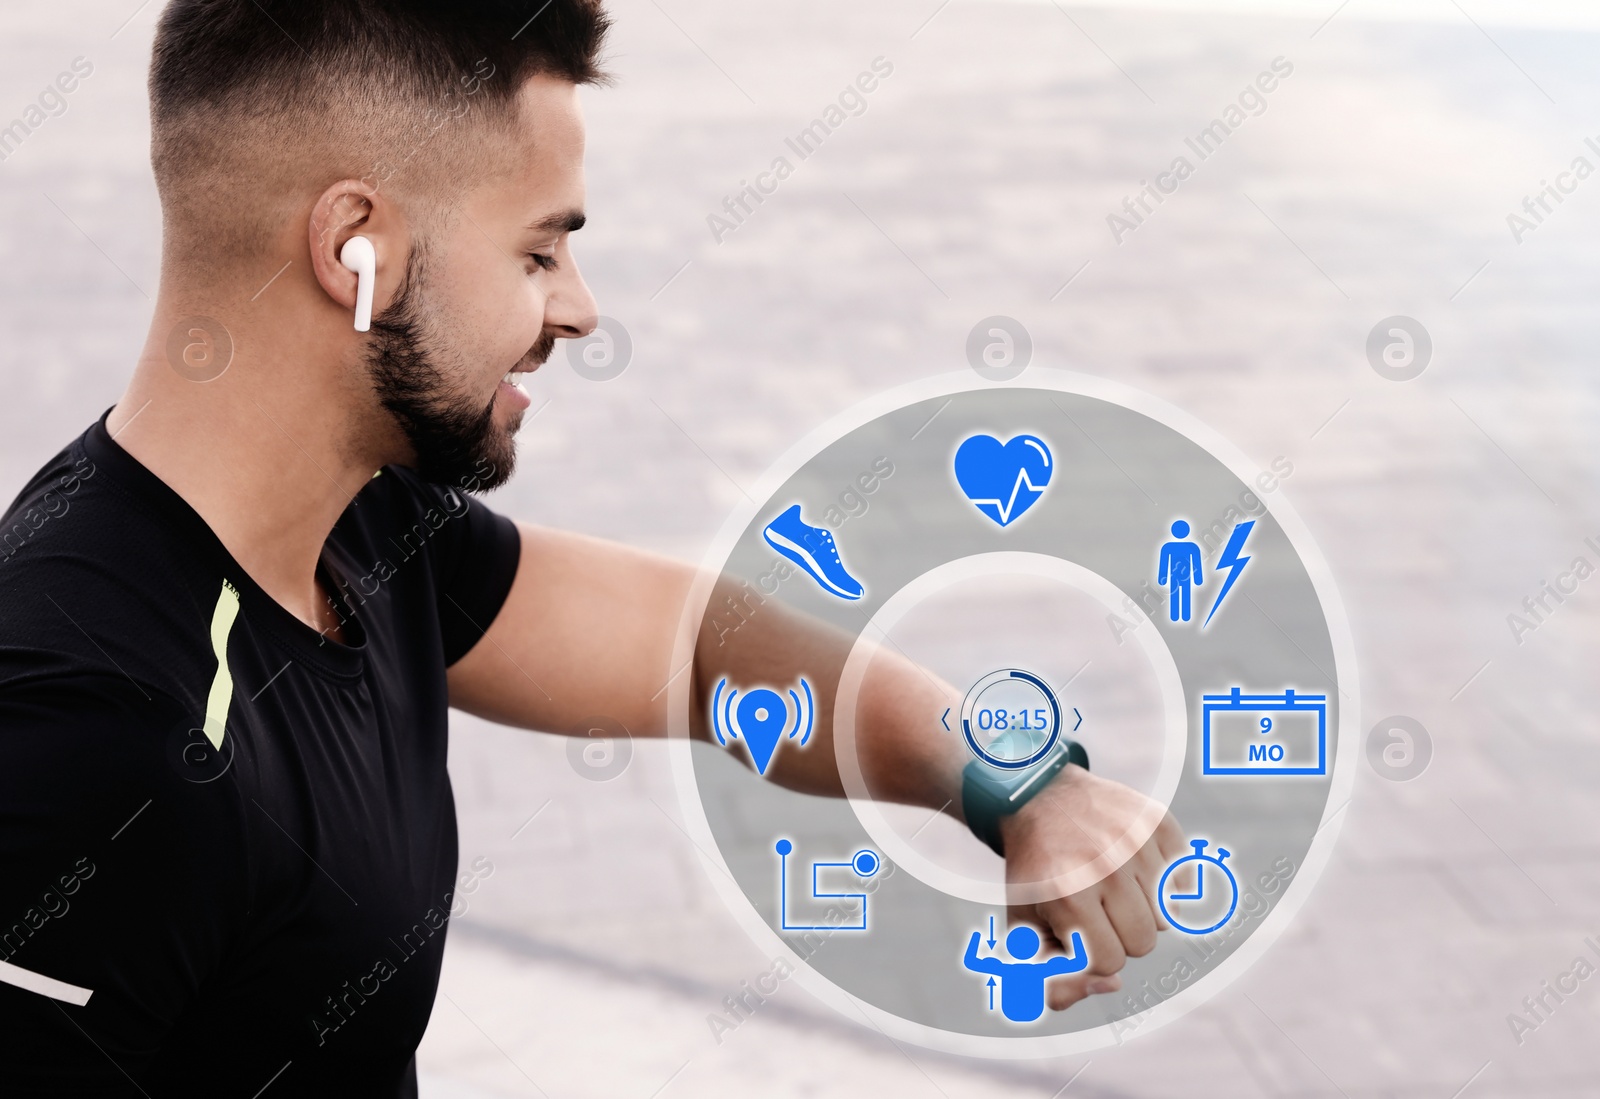 Image of Man using smart watch during training outdoors. Illustration near hand with device